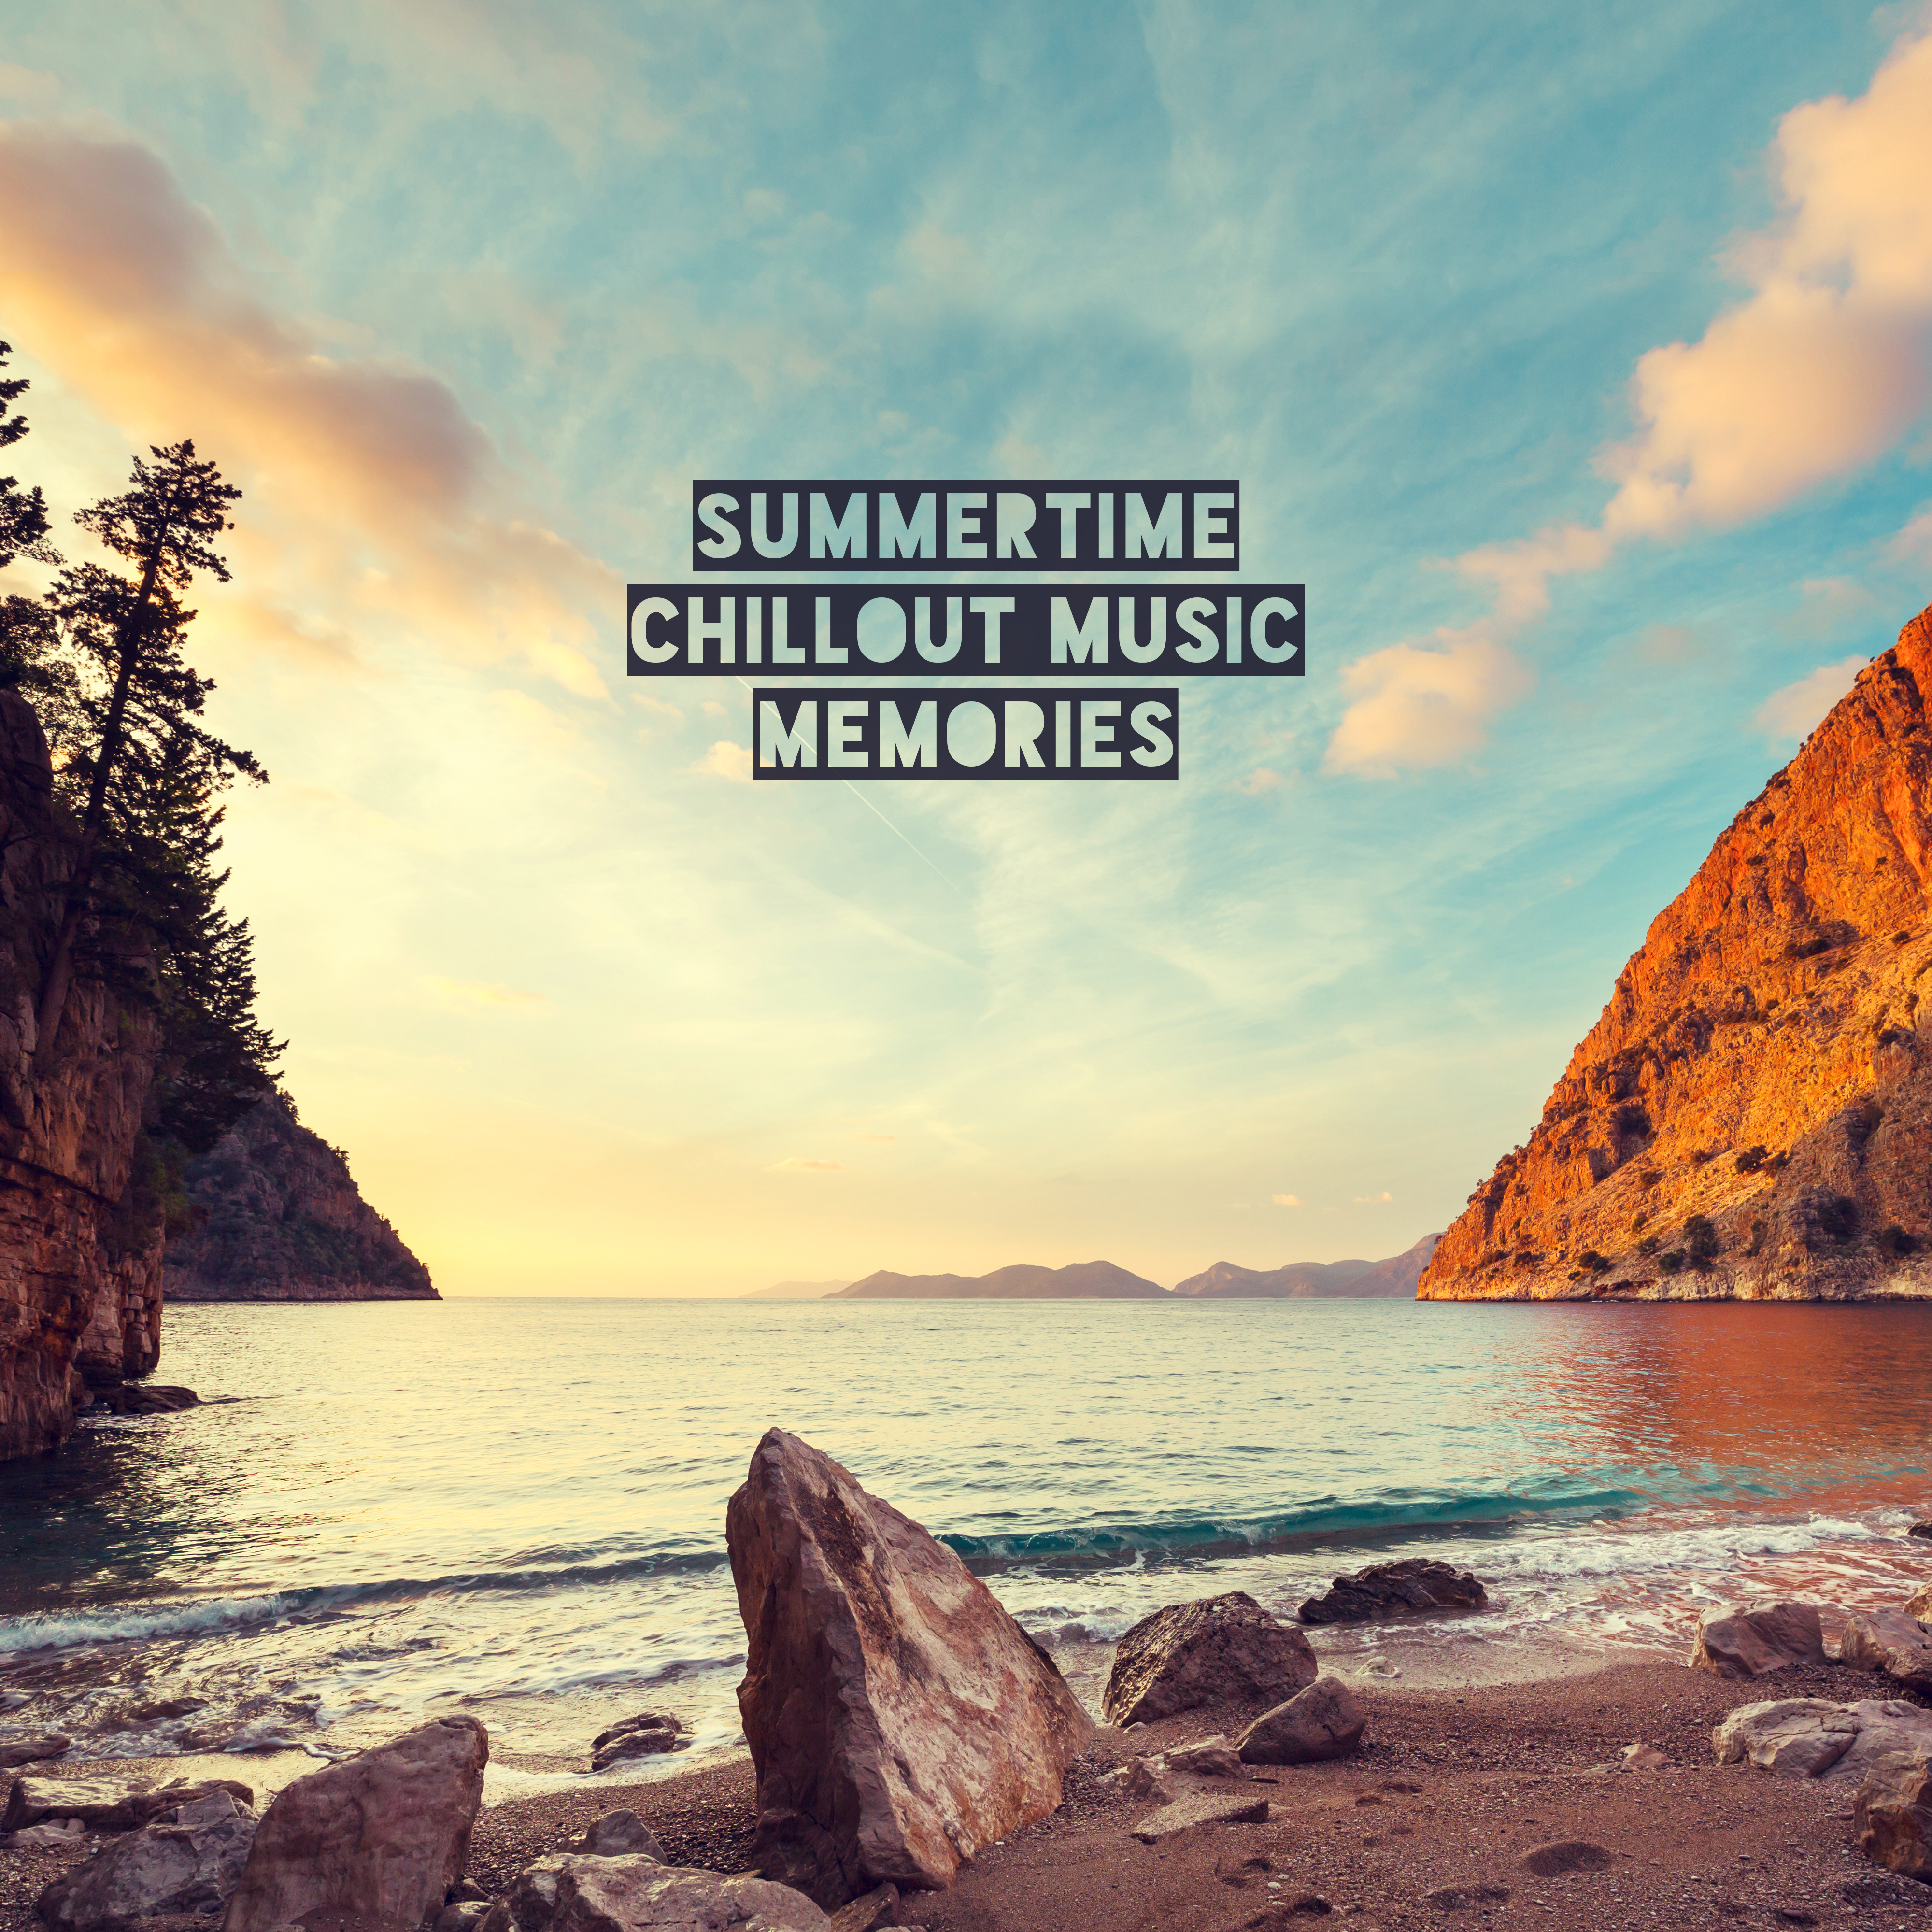 Summertime Chillout Music Memories